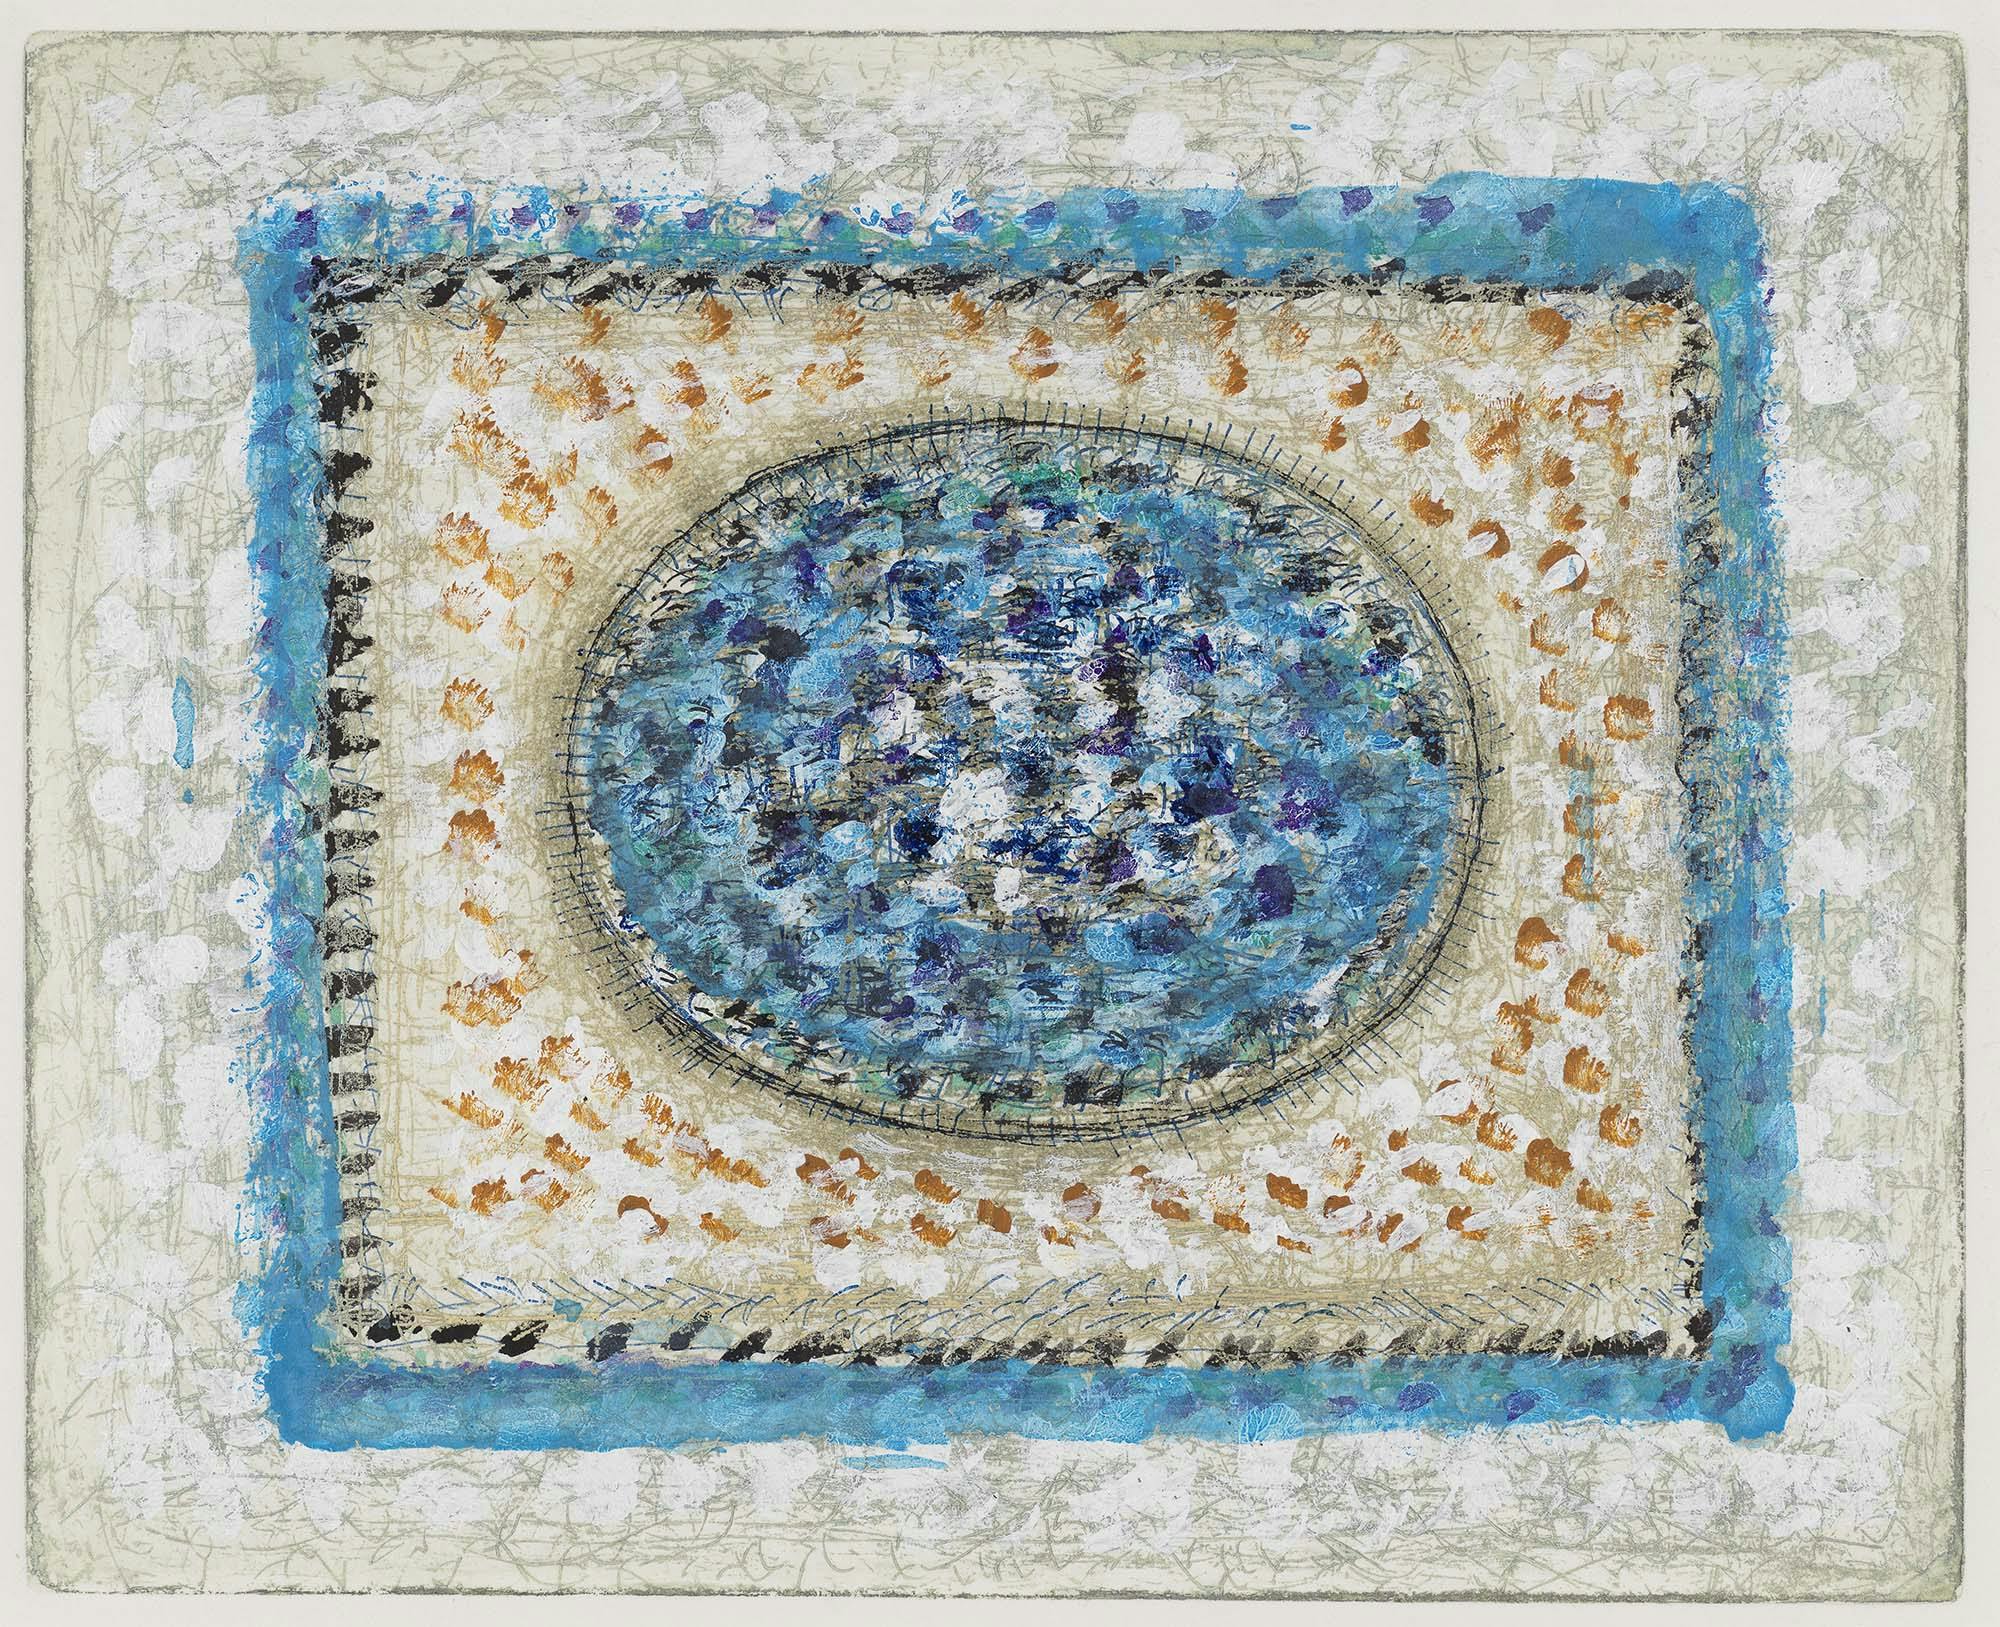 Blue Sonata
1980
Etching with acrylic
Plate: 8 x 9 7/8 in. (20.3 x 25.1 cm)
Sheet: 13 5/8 x 16 5/8 in. (34.6 x 42.2 cm)
 – The Richard Pousette-Dart Foundation